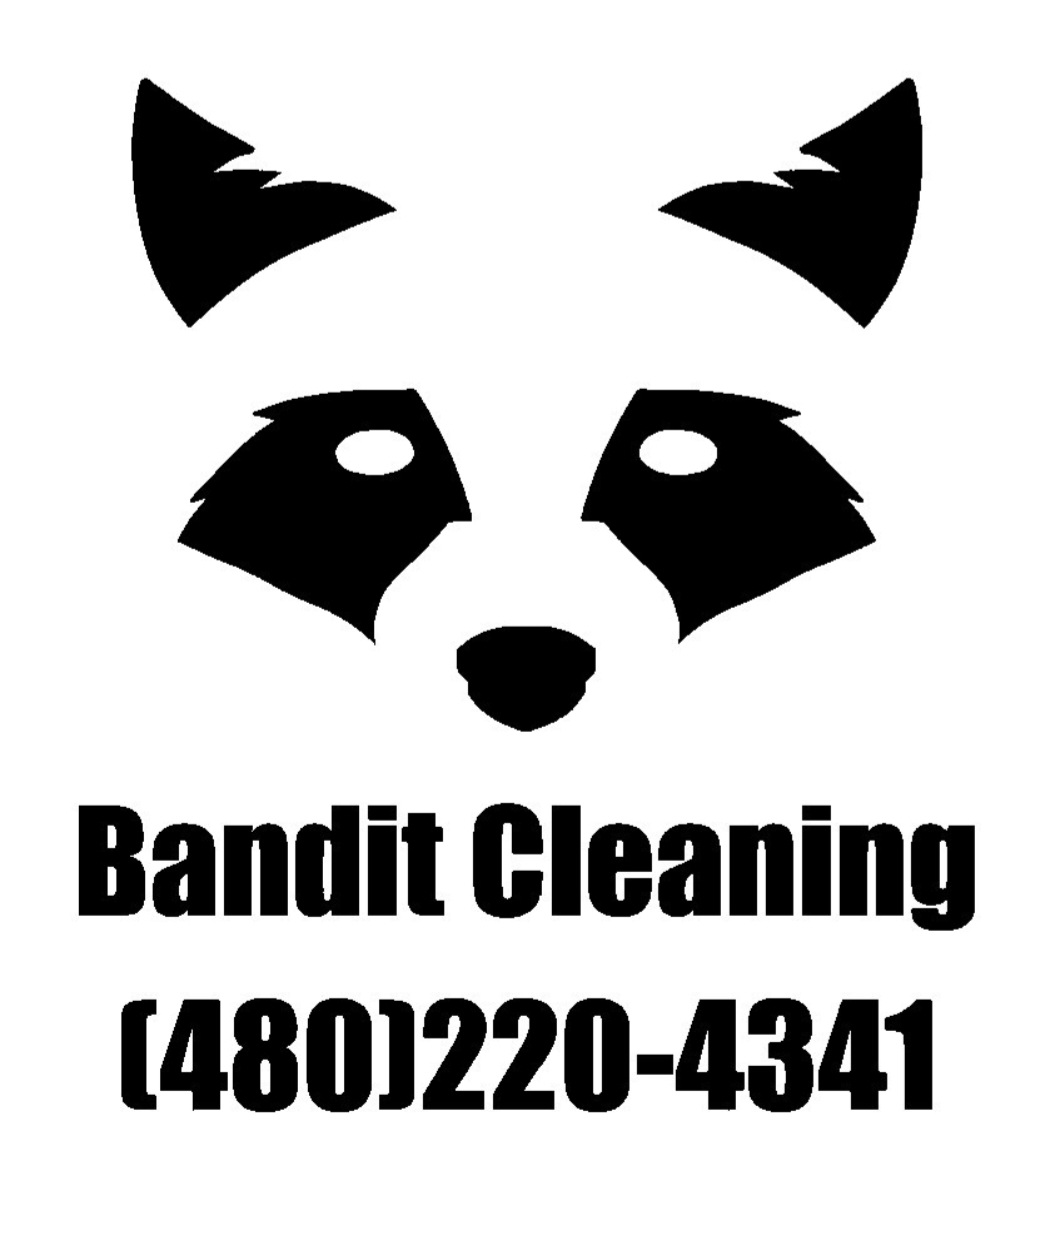 Bandit Cleaning